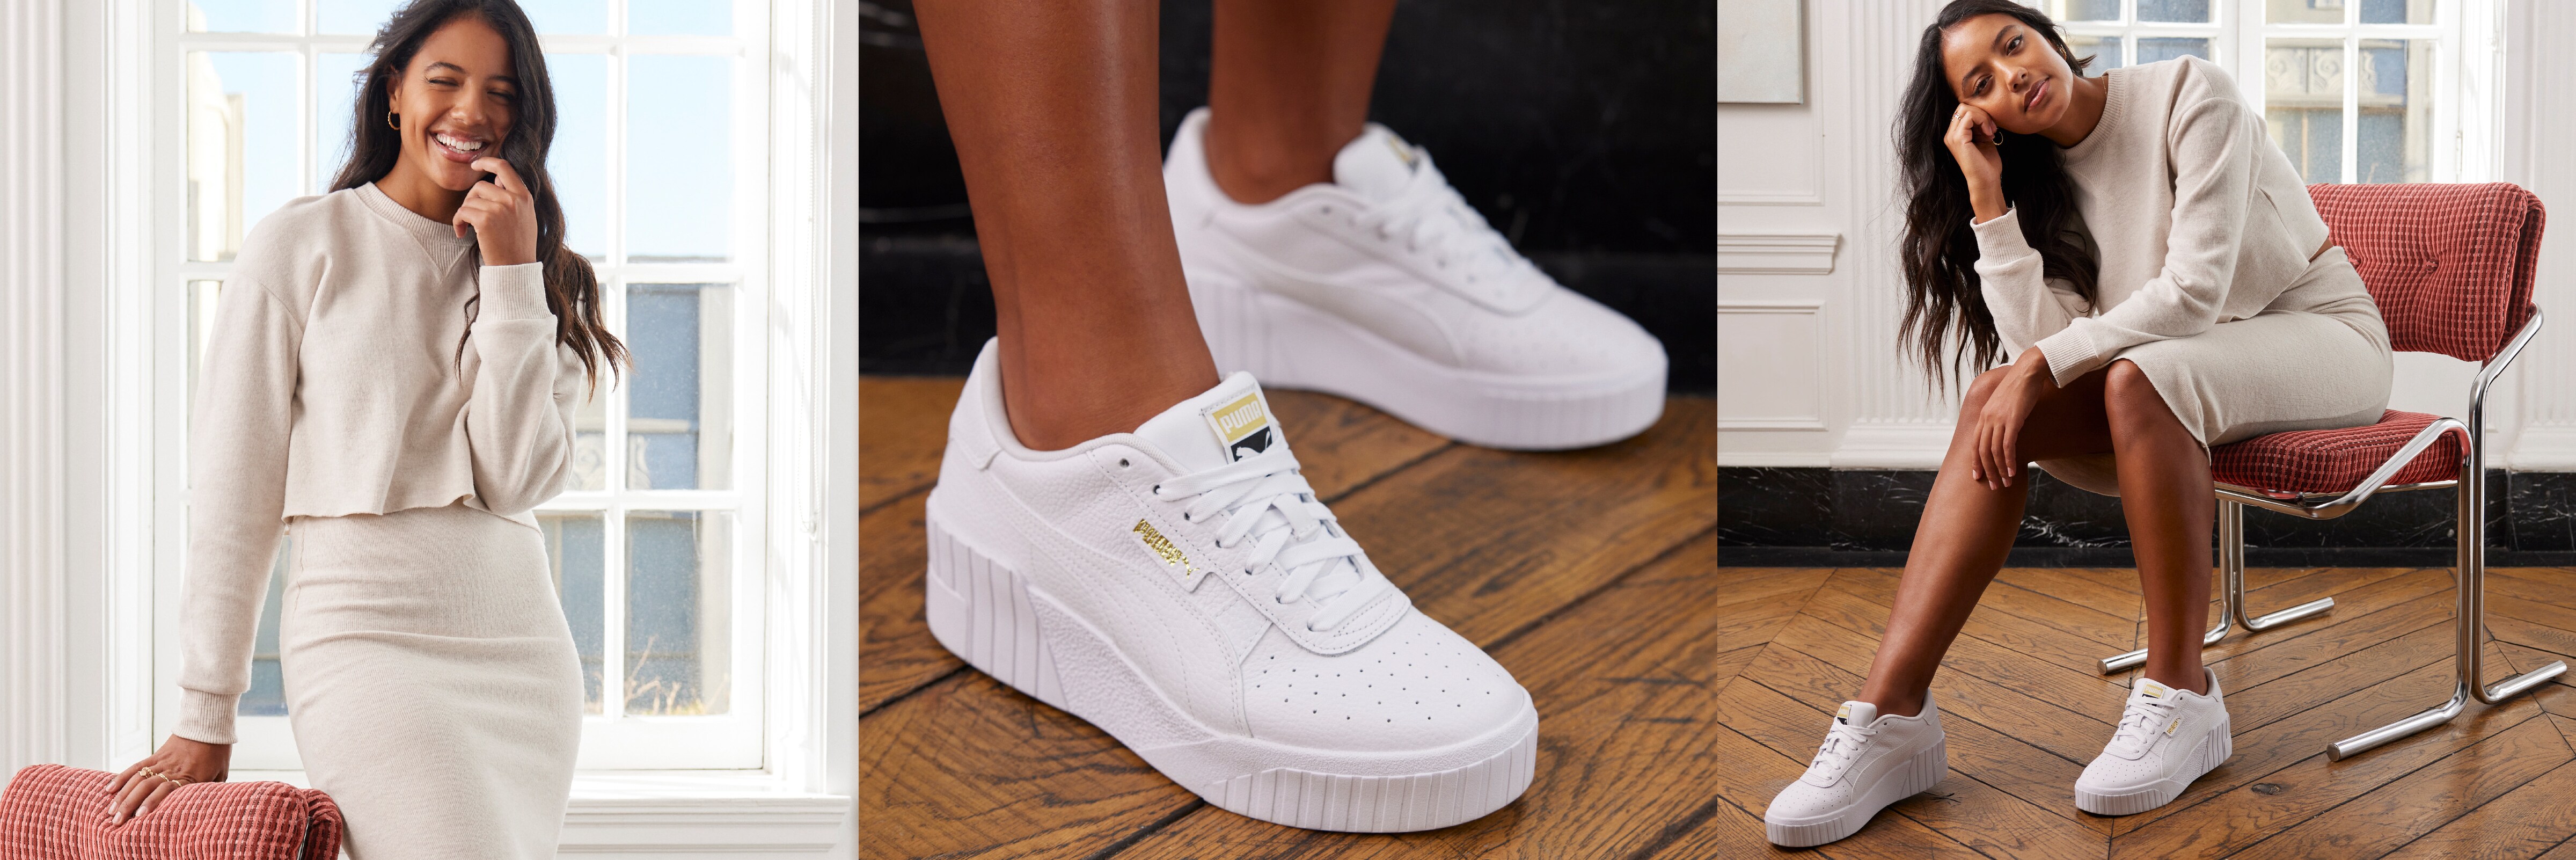 cute sneakers to wear with dresses